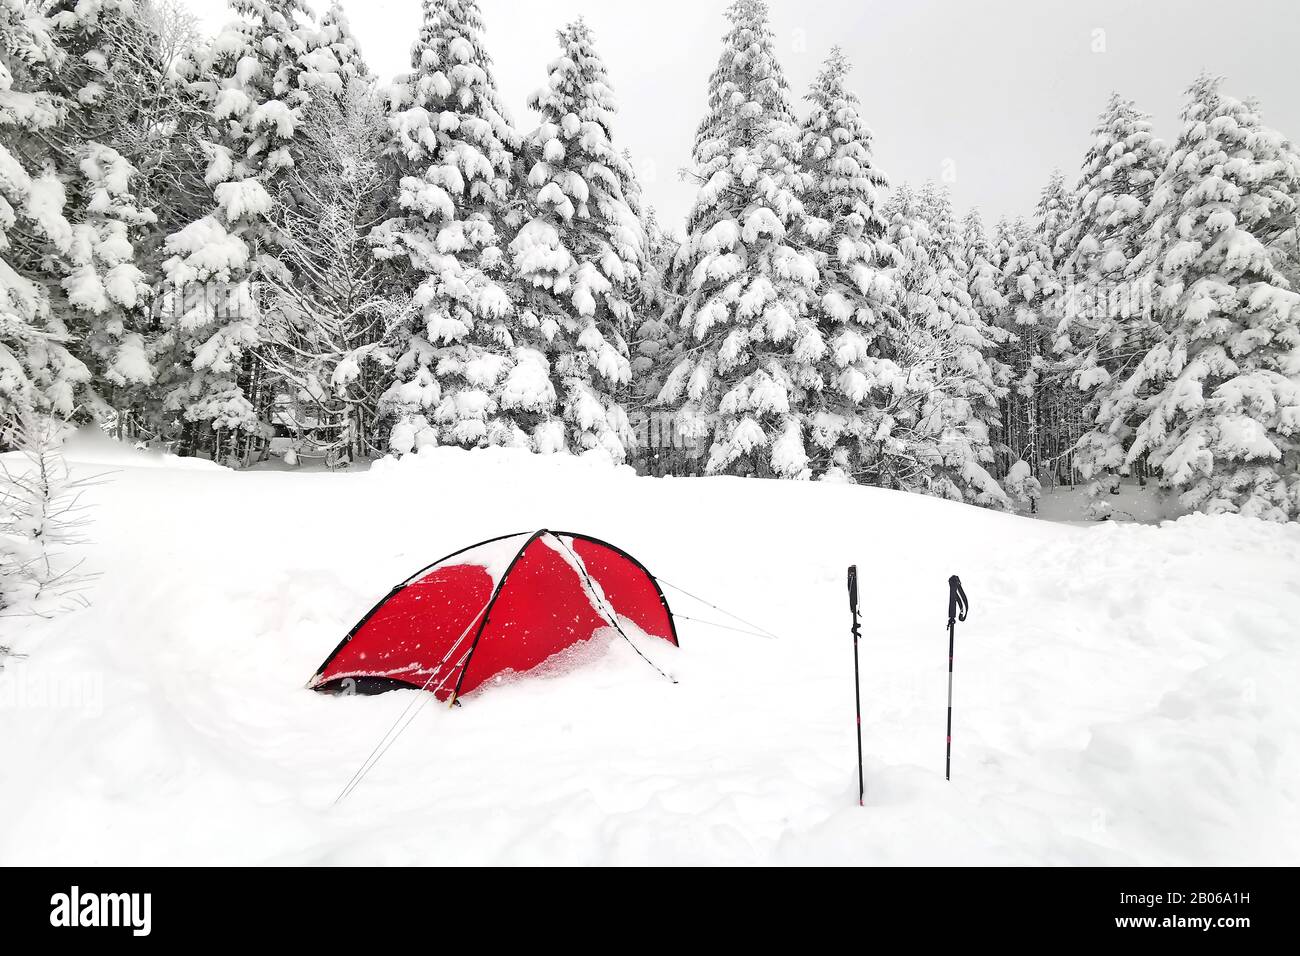 The red tent and hiking sticks, natural snow hill in Japan Yatsugatake mountains Stock Photo